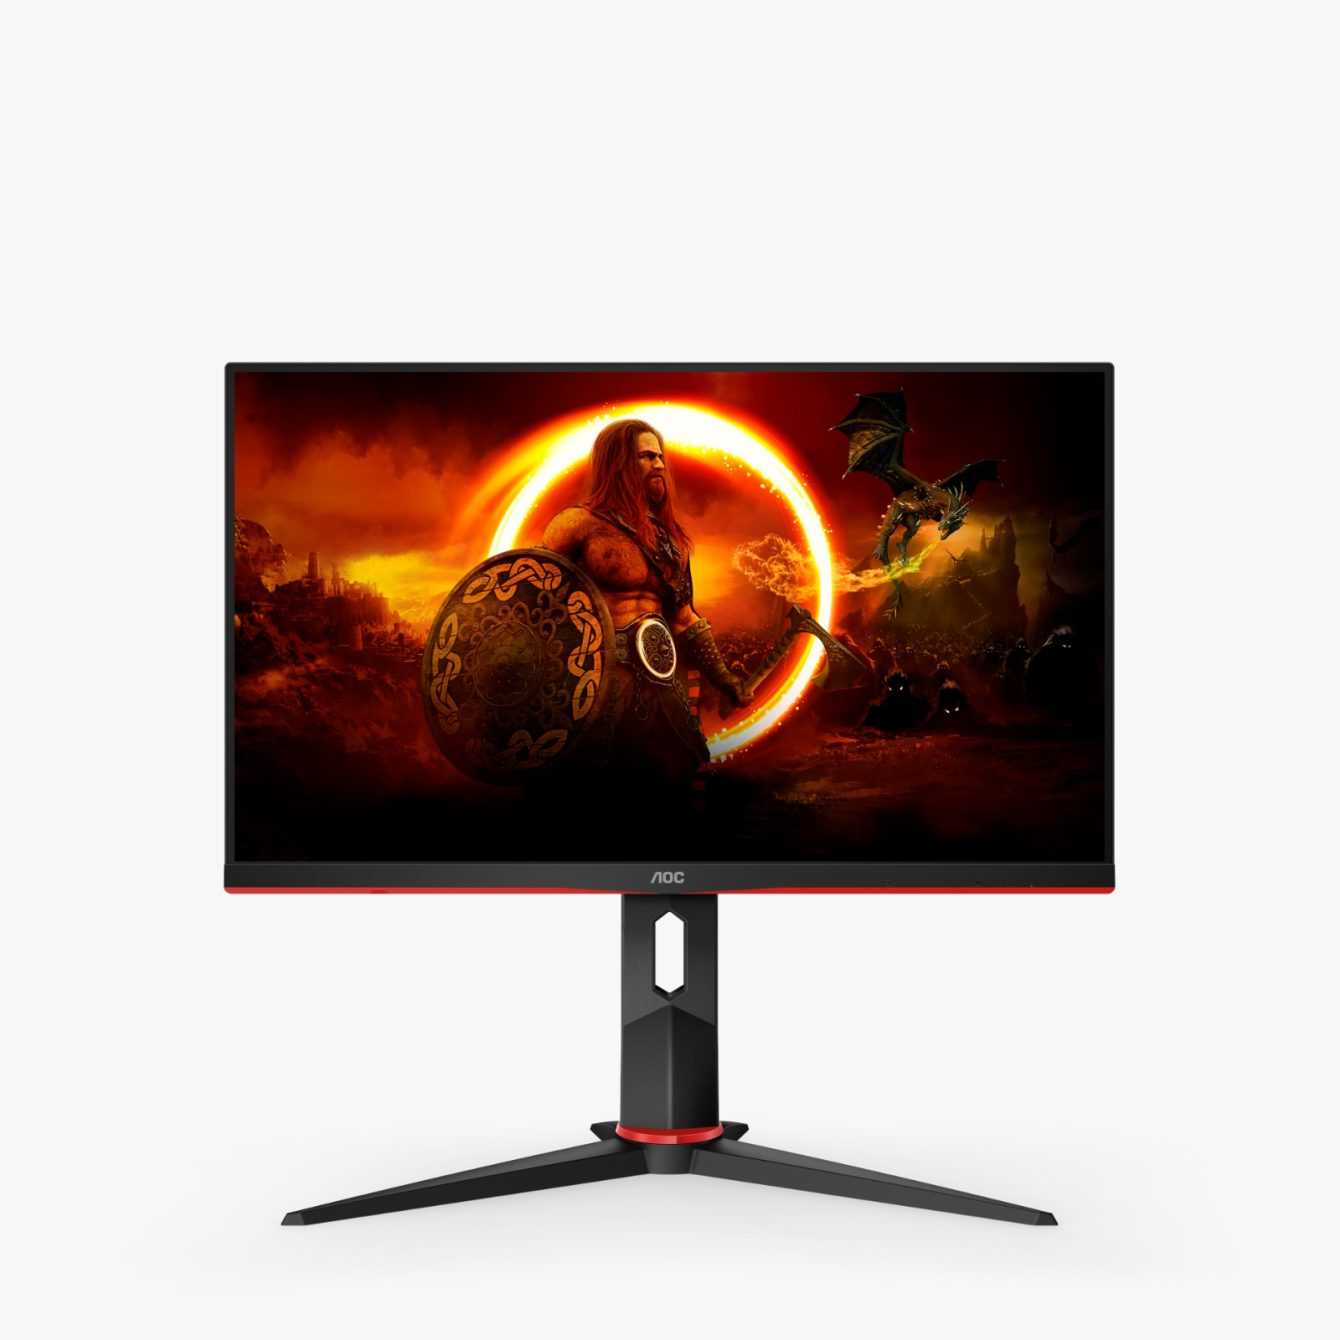 The new AGON by AOC 24″ Q24G2A/BK QHD gaming monitor is coming